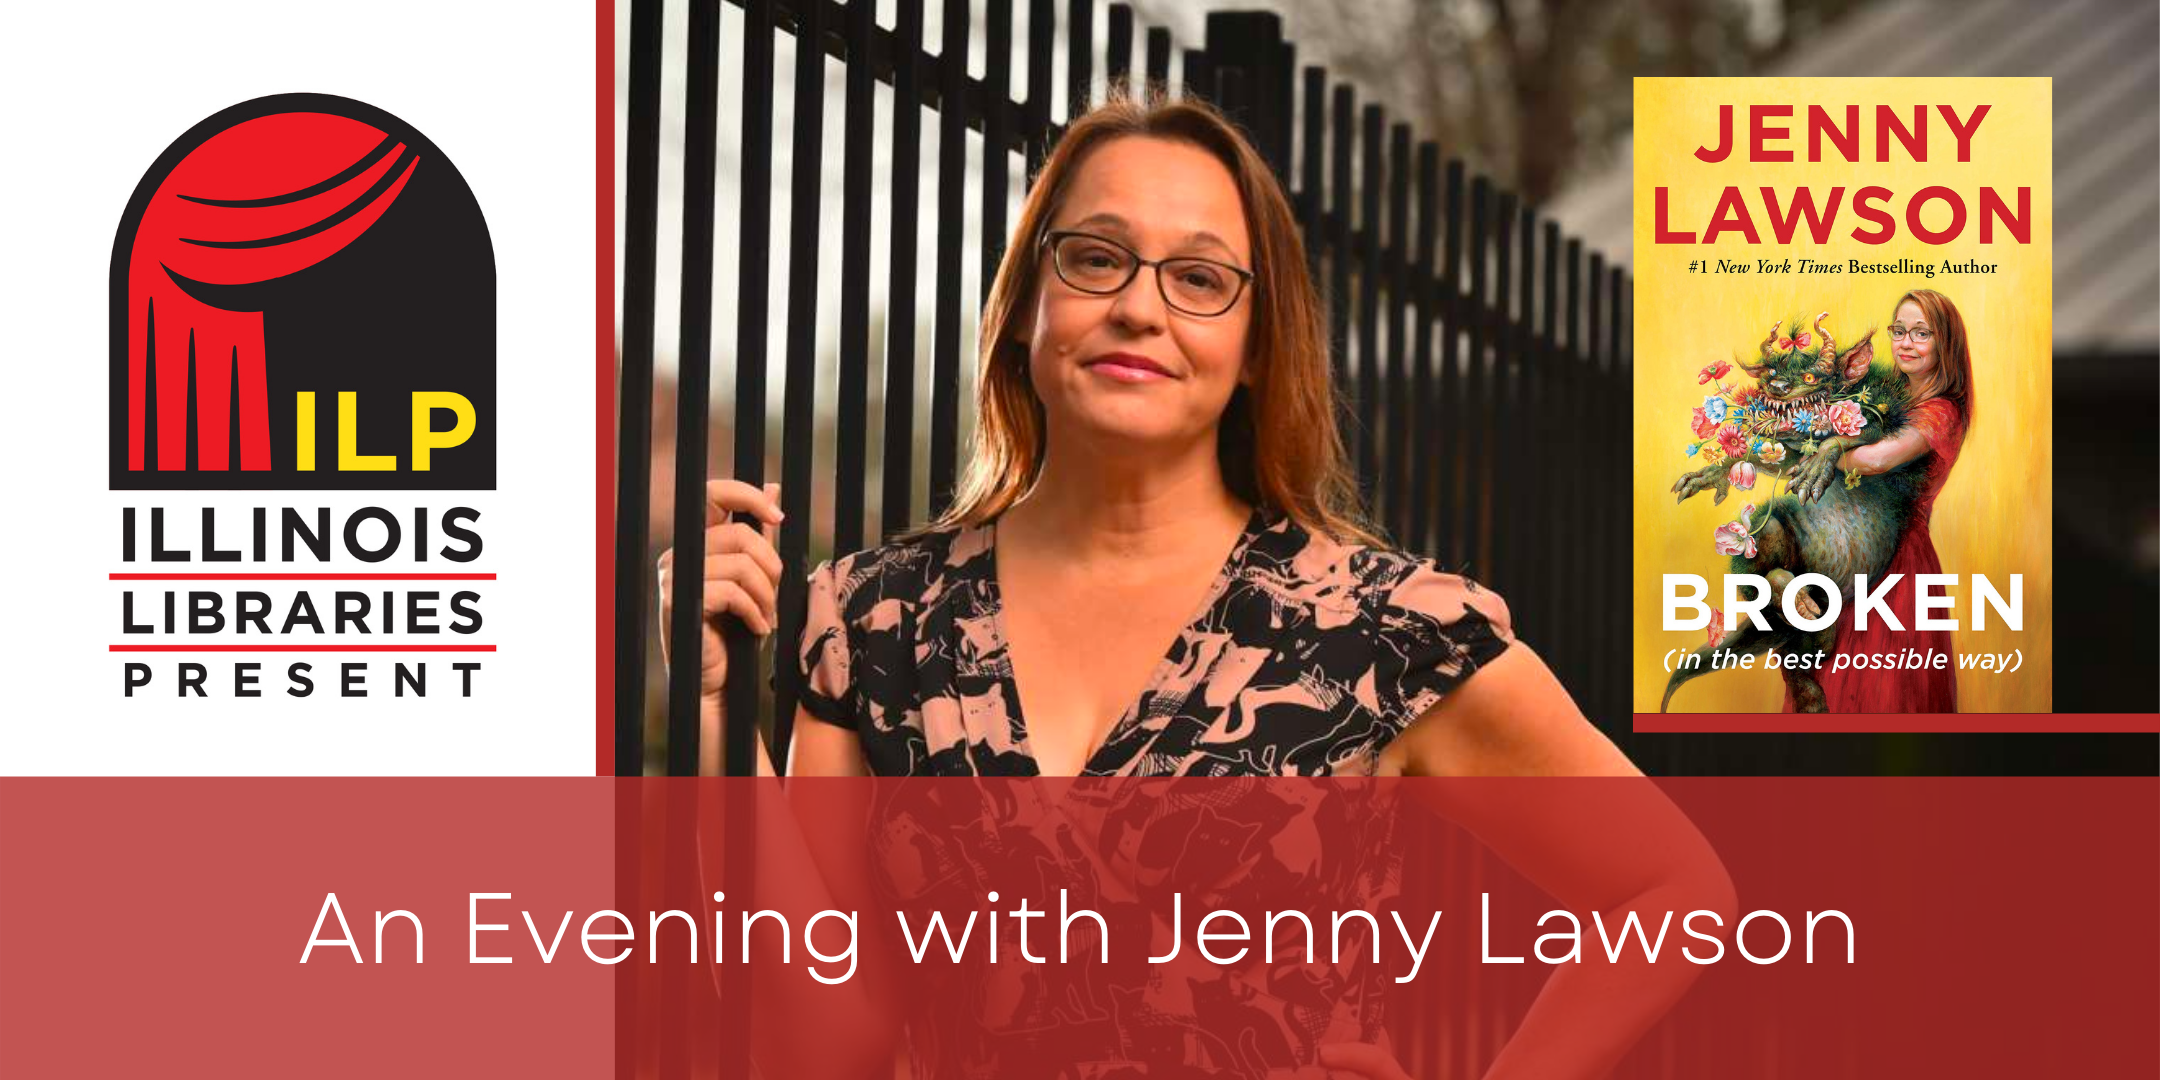 Illinois Libraries Present: An Evening with Jenny Lawson event image with author and book covers